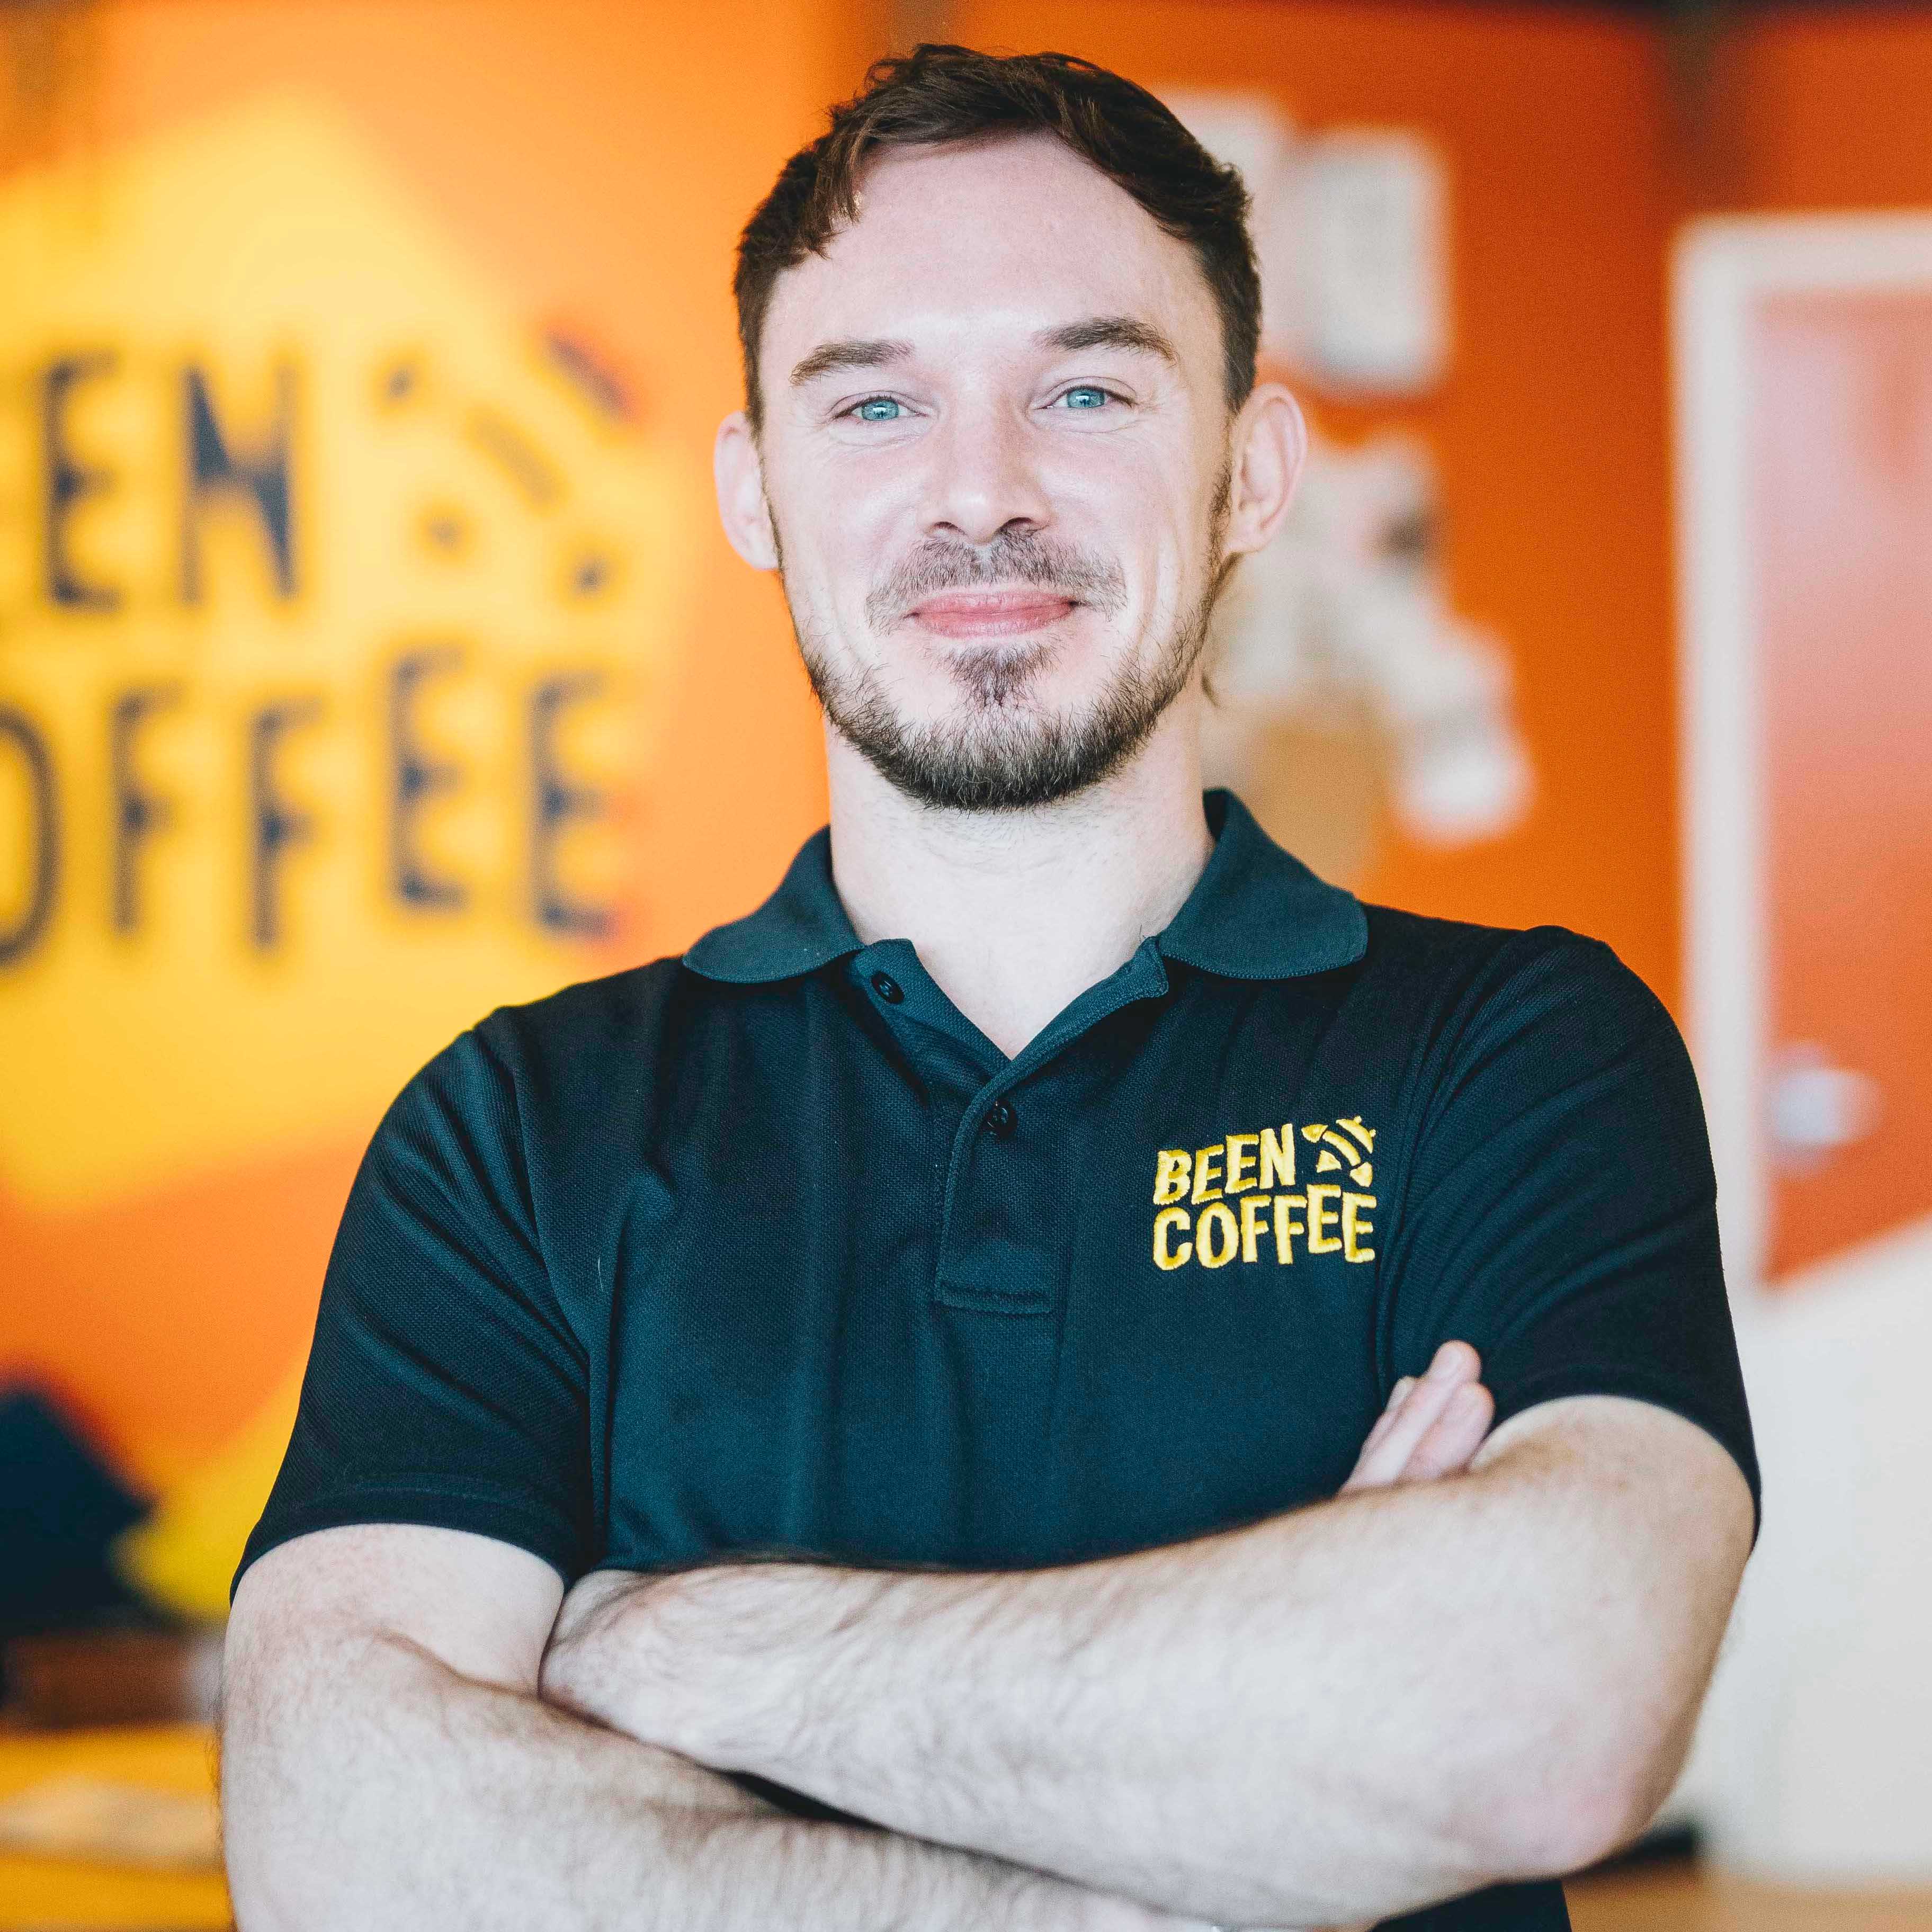 Martin of Been Coffee